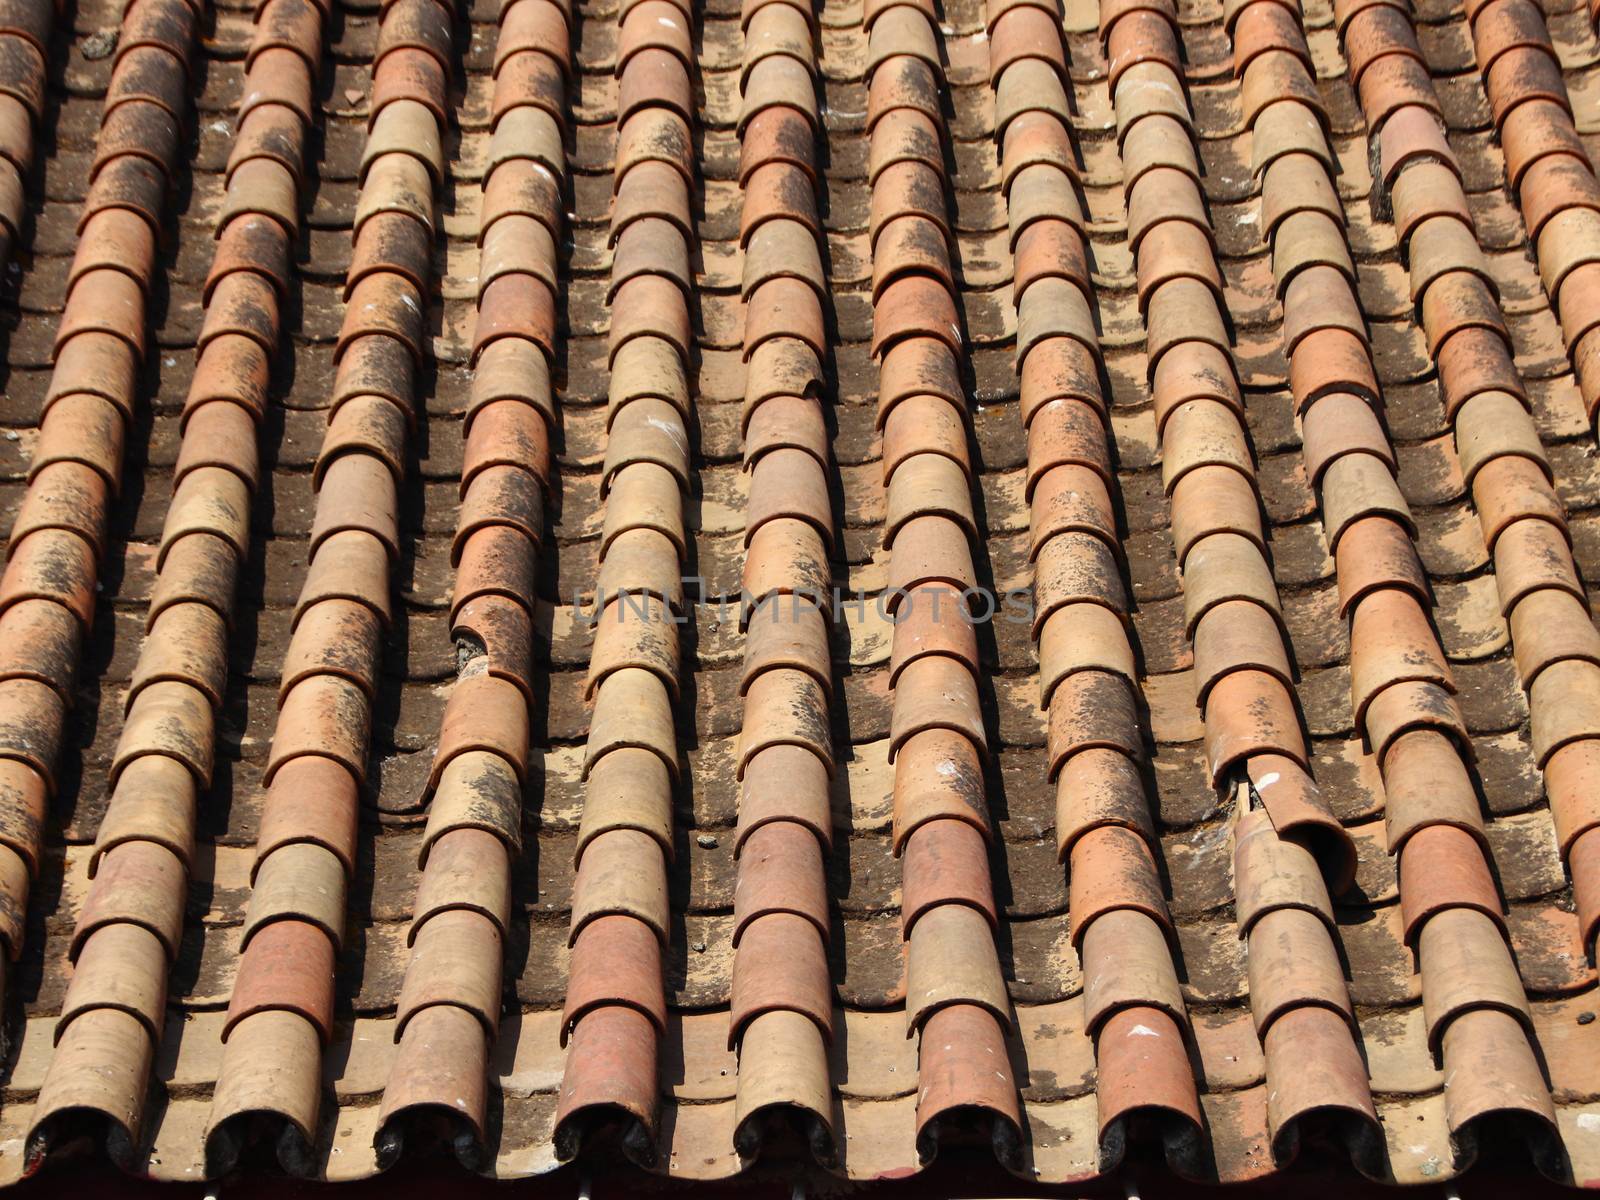 Old Tile Brick Roof with Ending in Warm Colors by HoleInTheBox